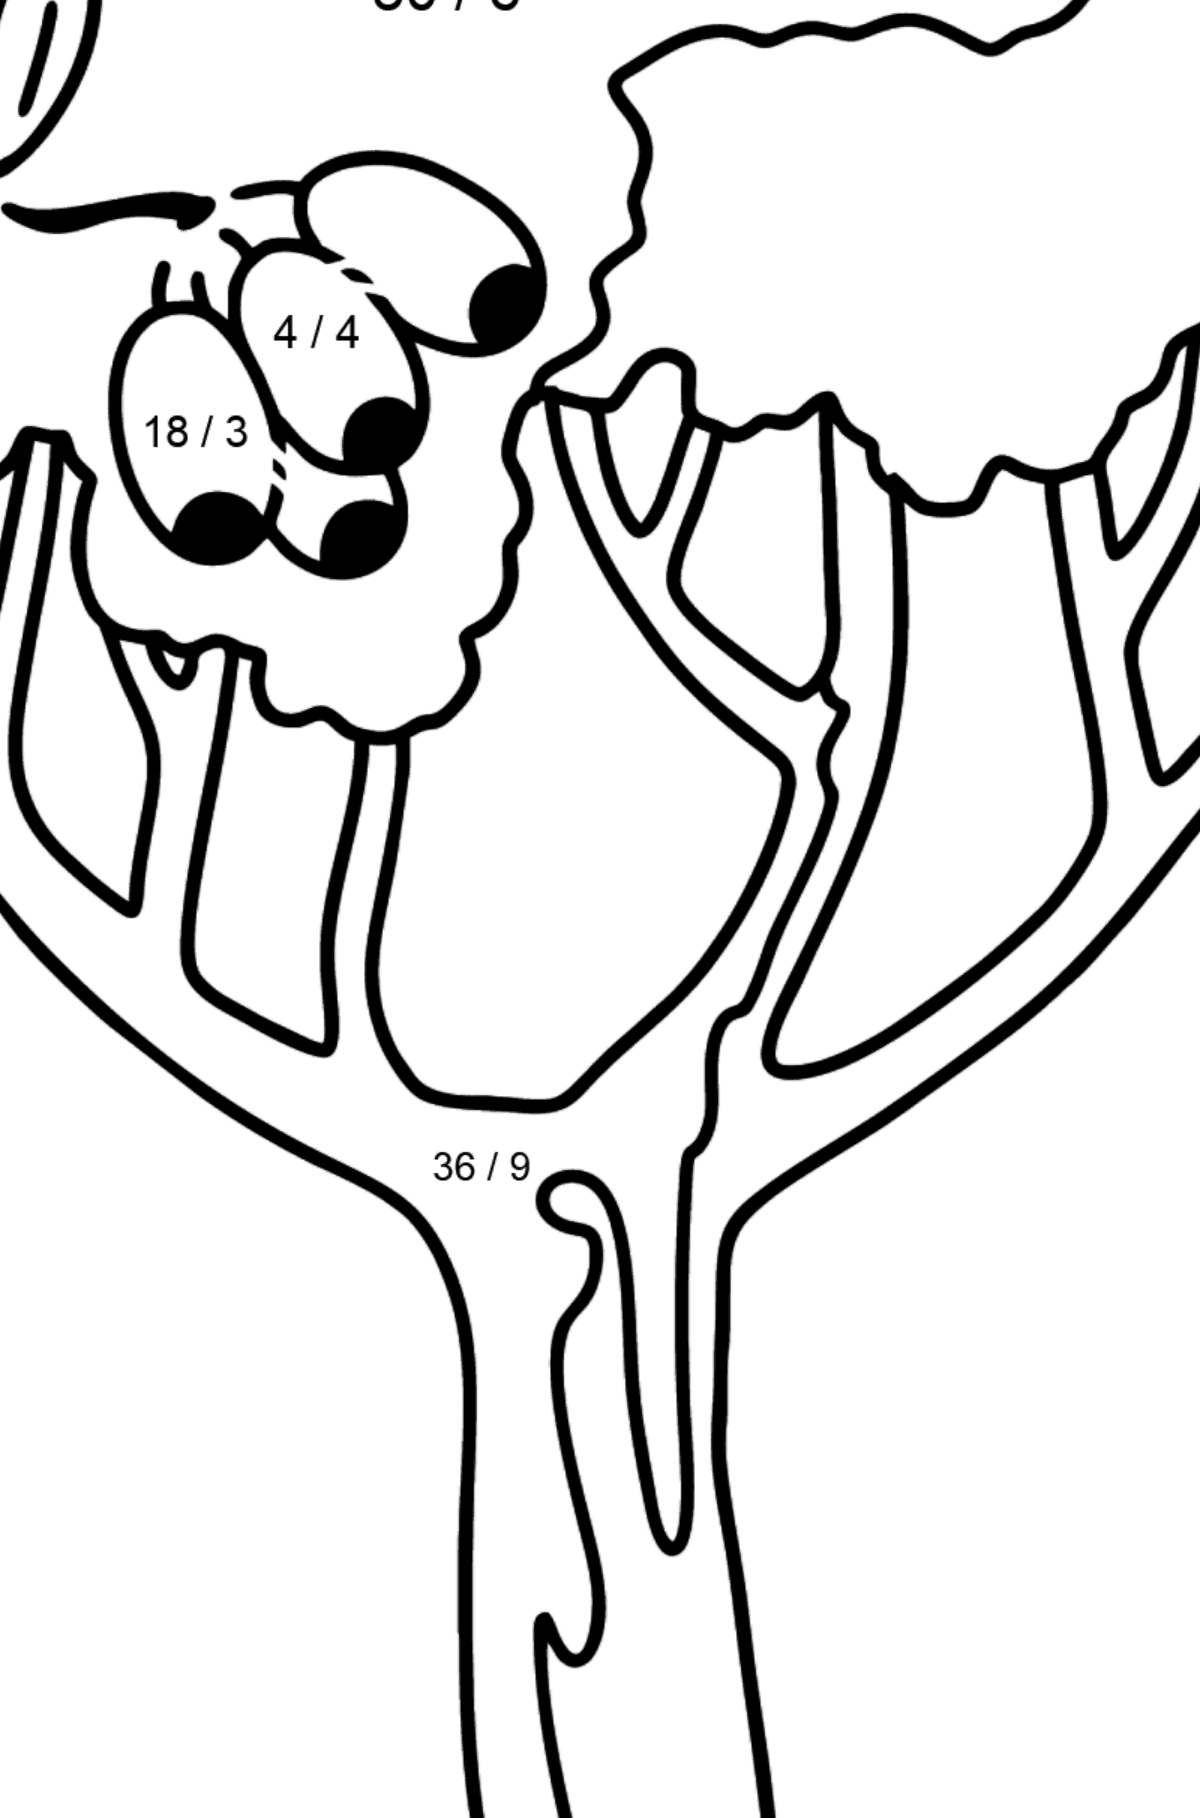 Gum tree - Corimbia coloring page - Math Coloring - Division for Kids